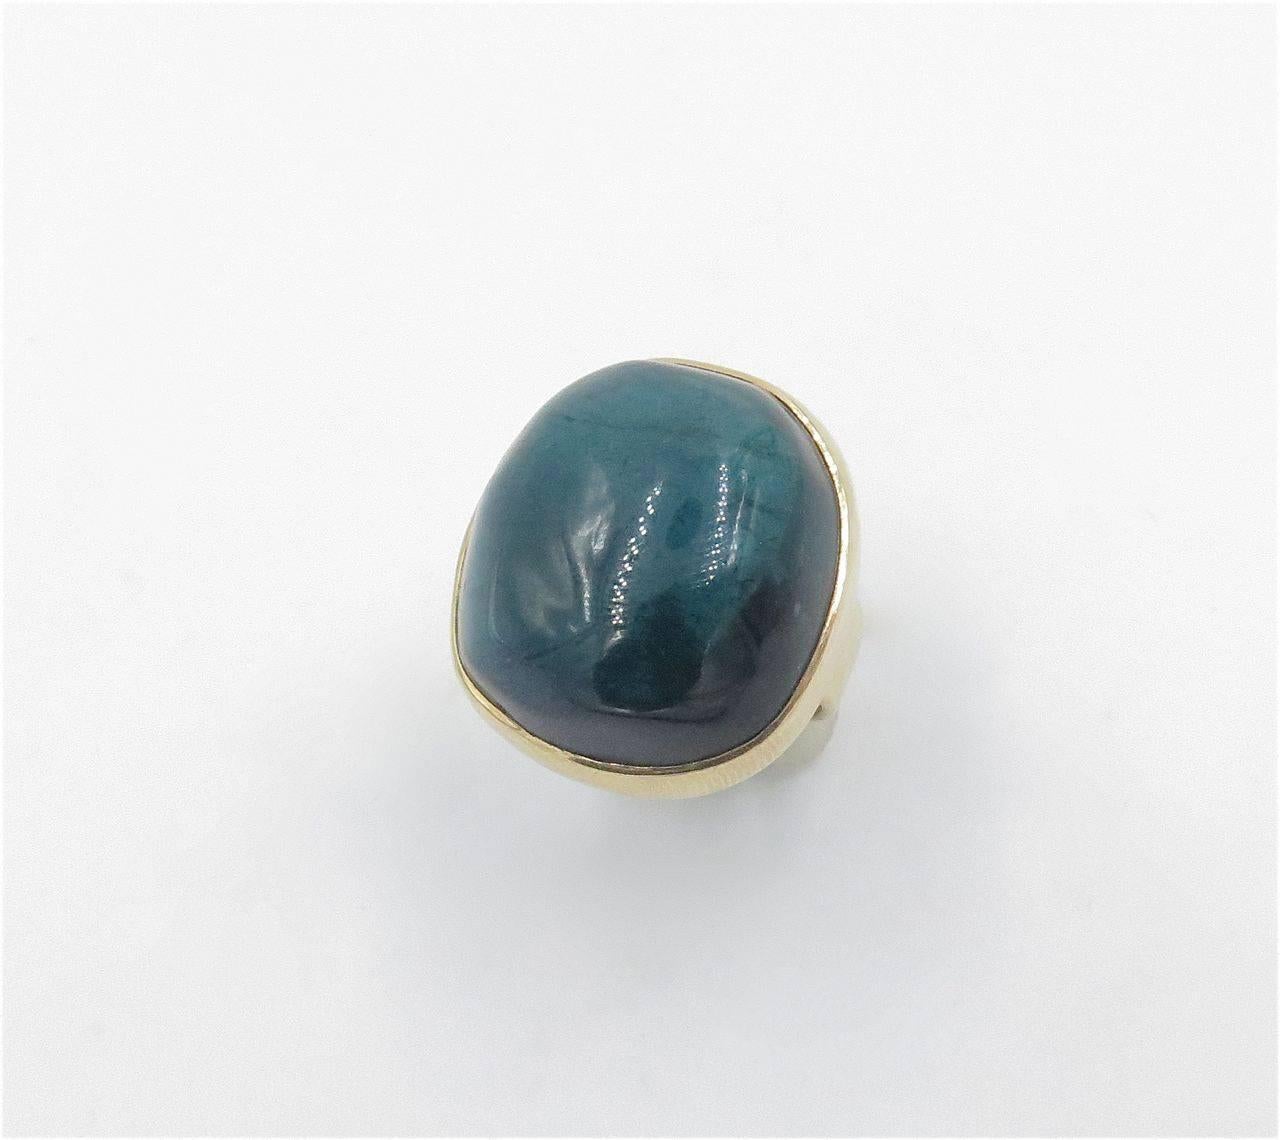 A 14K yellow gold and green tourmaline ring. Circa 1980. Centering a bezel set oval cabochon green tourmaline, measuring approximately 23.00 x 21.00 x 10.50mm, and weighing approximately 40.00 carats. Size 7.  Gross weight approximately 17.7 grams.